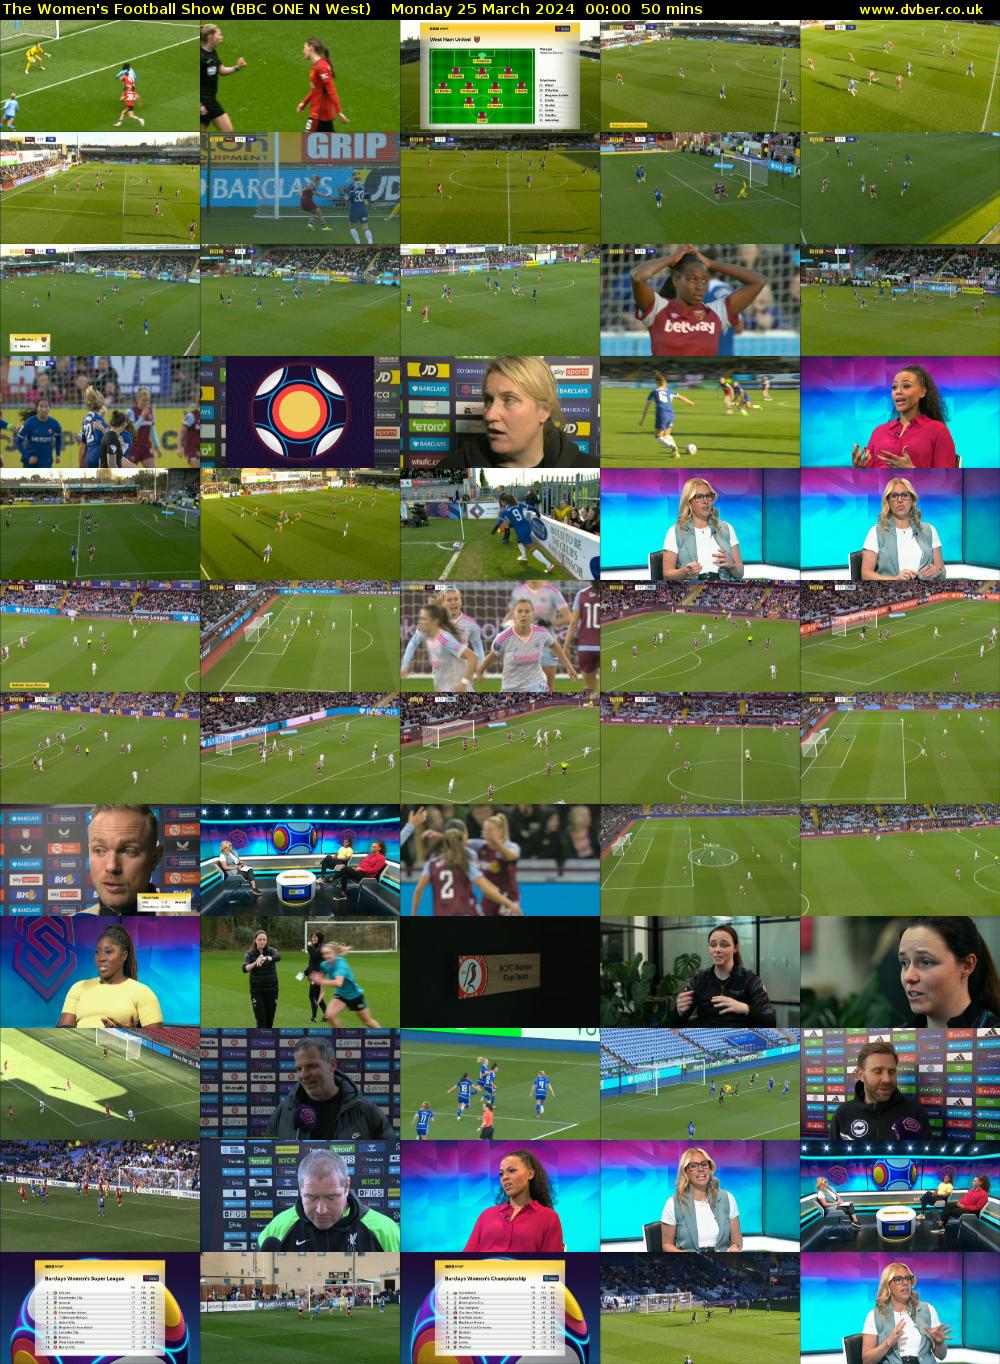 The Women's Football Show (BBC ONE N West) Monday 25 March 2024 00:00 - 00:50